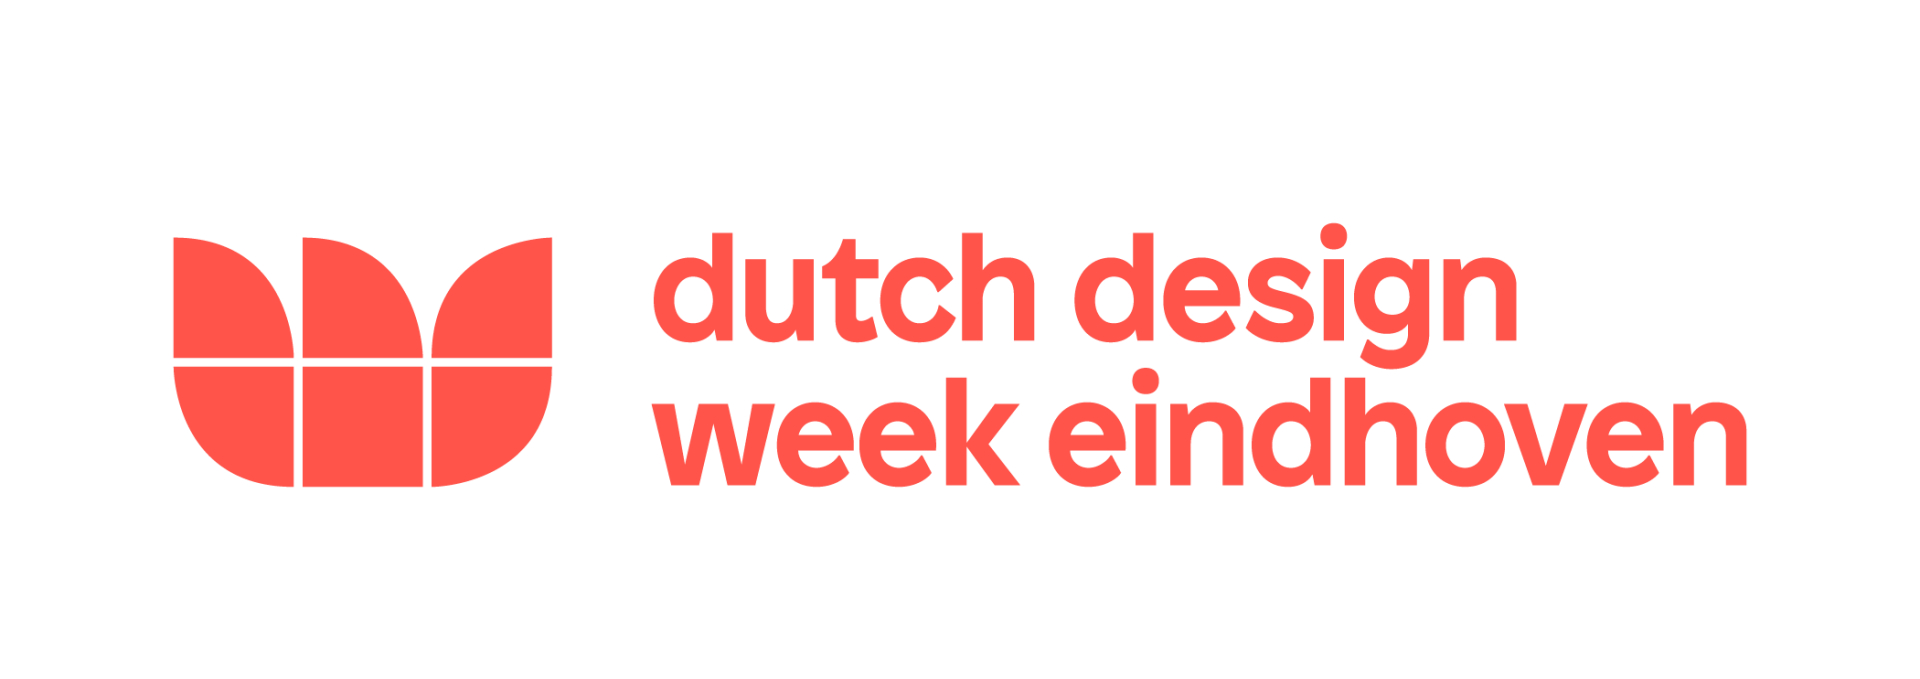 Check Out Daily Design News Exclusive Guide to the Dutch Design Week > Daily Design News > The freshest news in the design world > #dutchdesignweek #DDW #dailydesignews